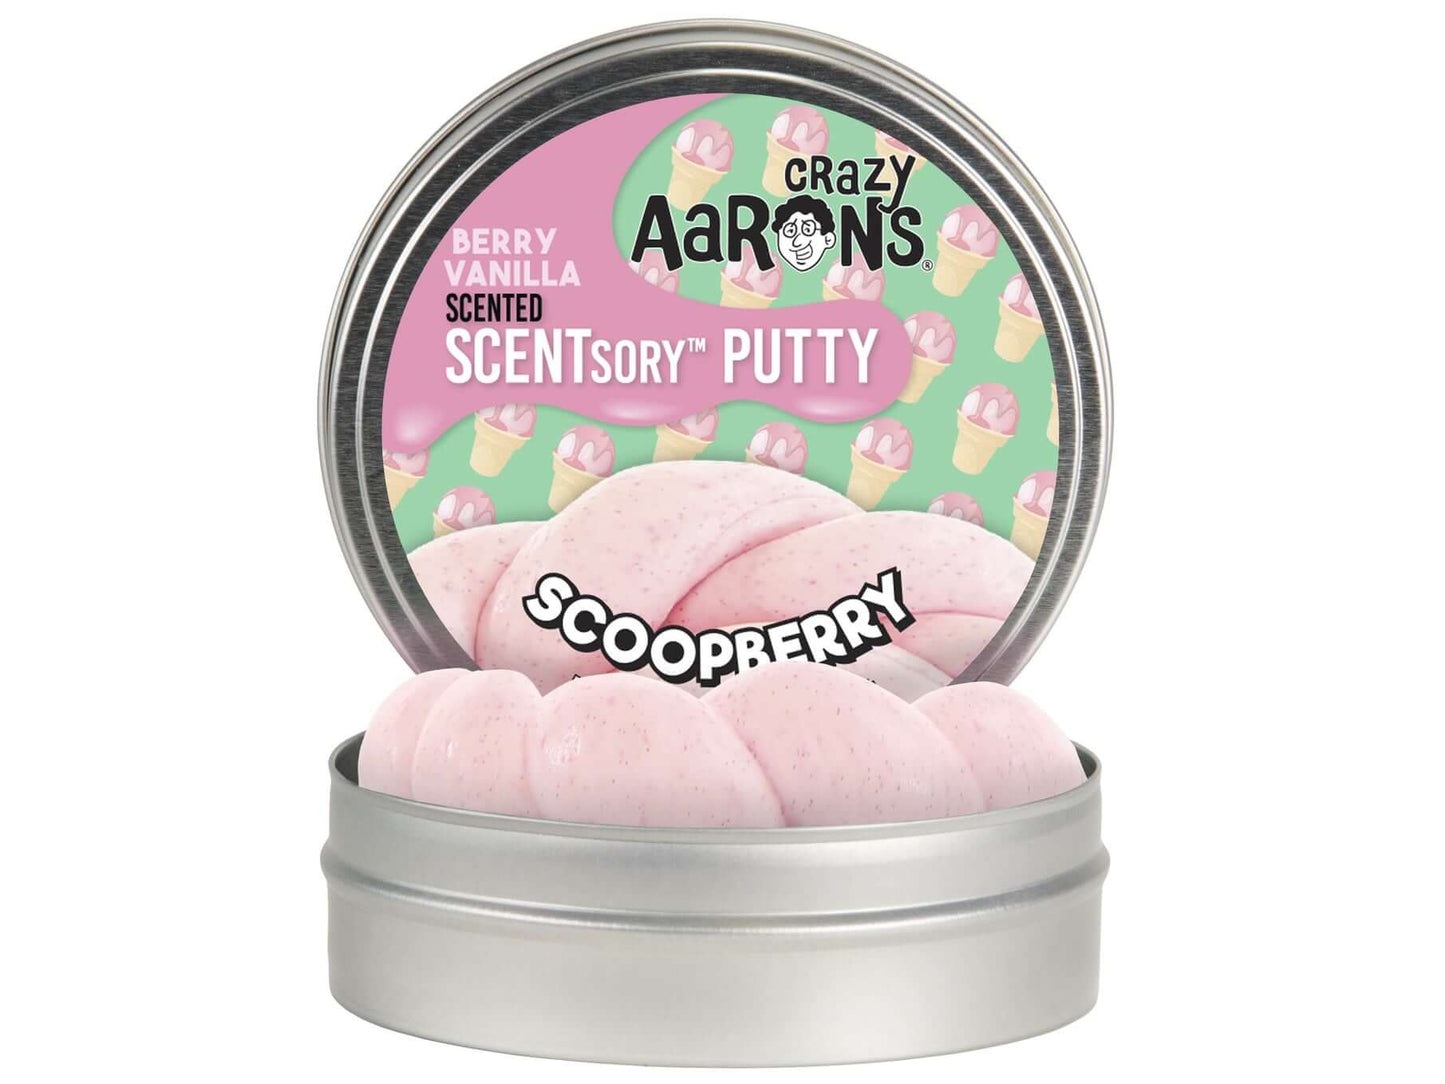 SB055 Crazy Aarons Putty scented scoopberry